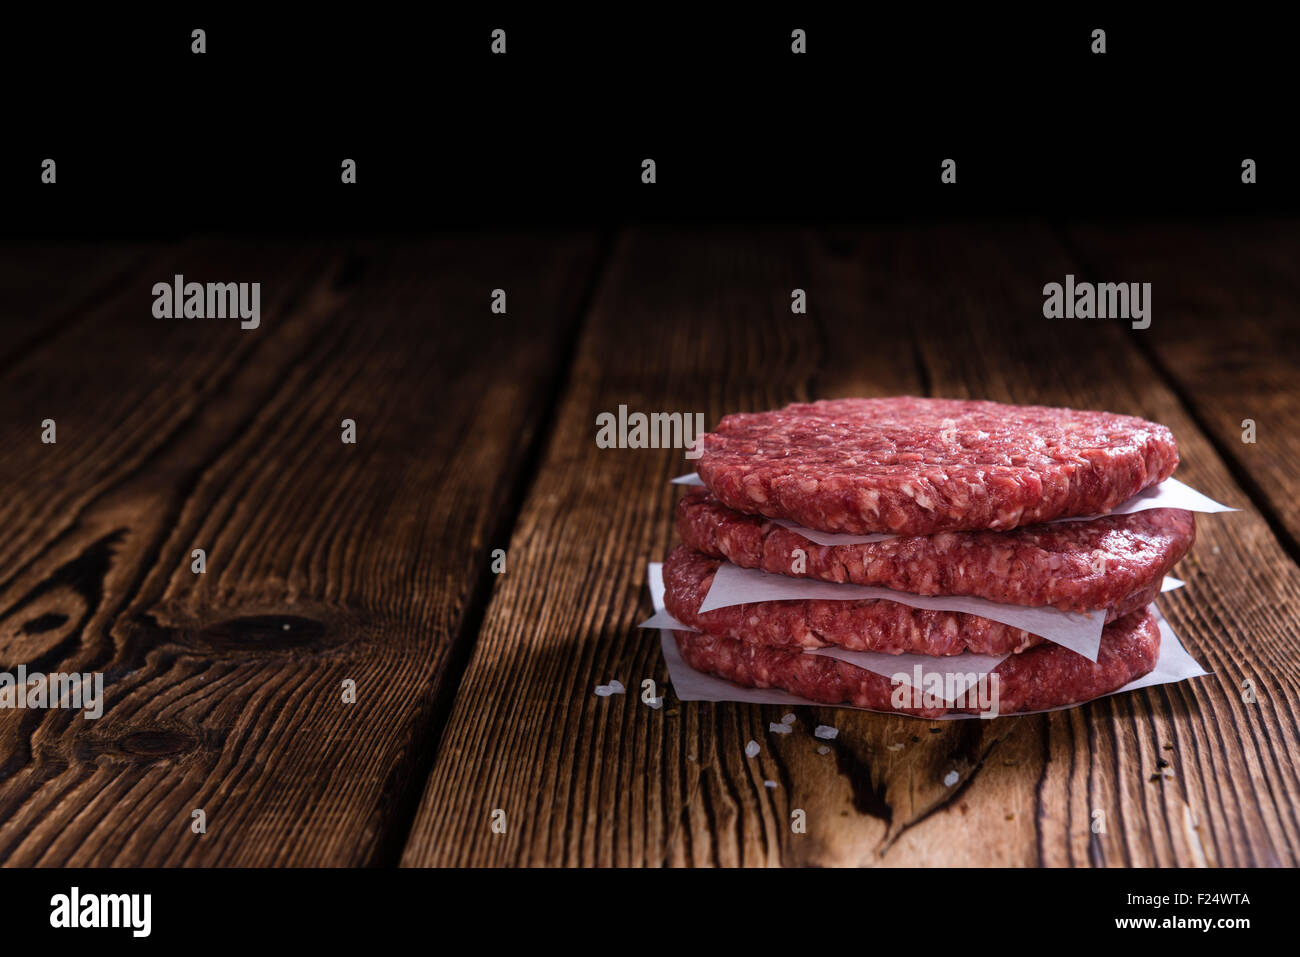 Some fresh made Burgers (raw minced Beef) on an old wooden table Stock Photo